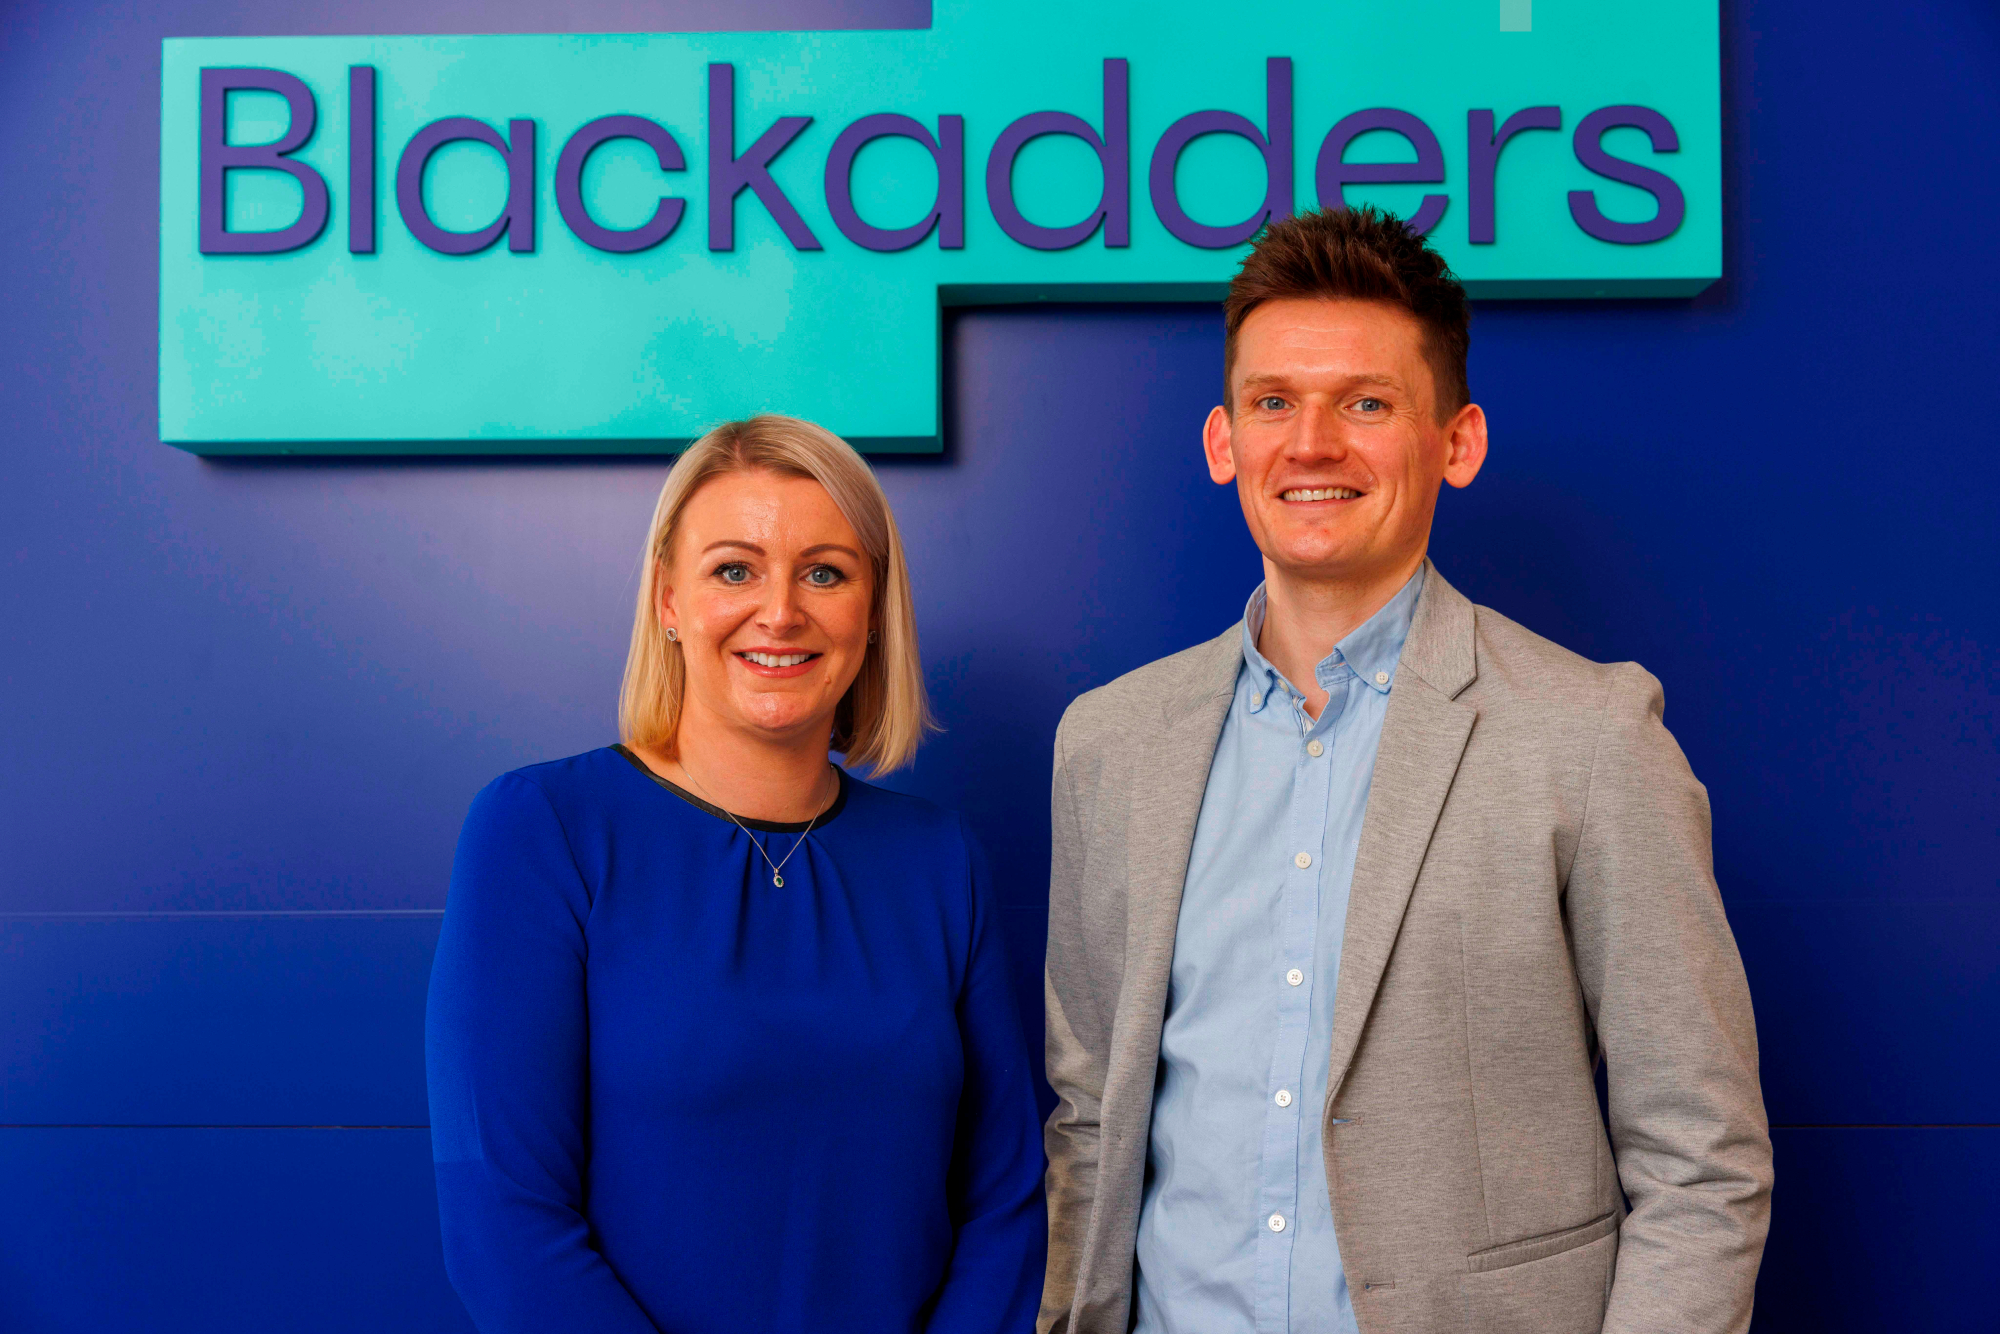 Claire Ogston named new residential property director for Blackadders in Aberdeen